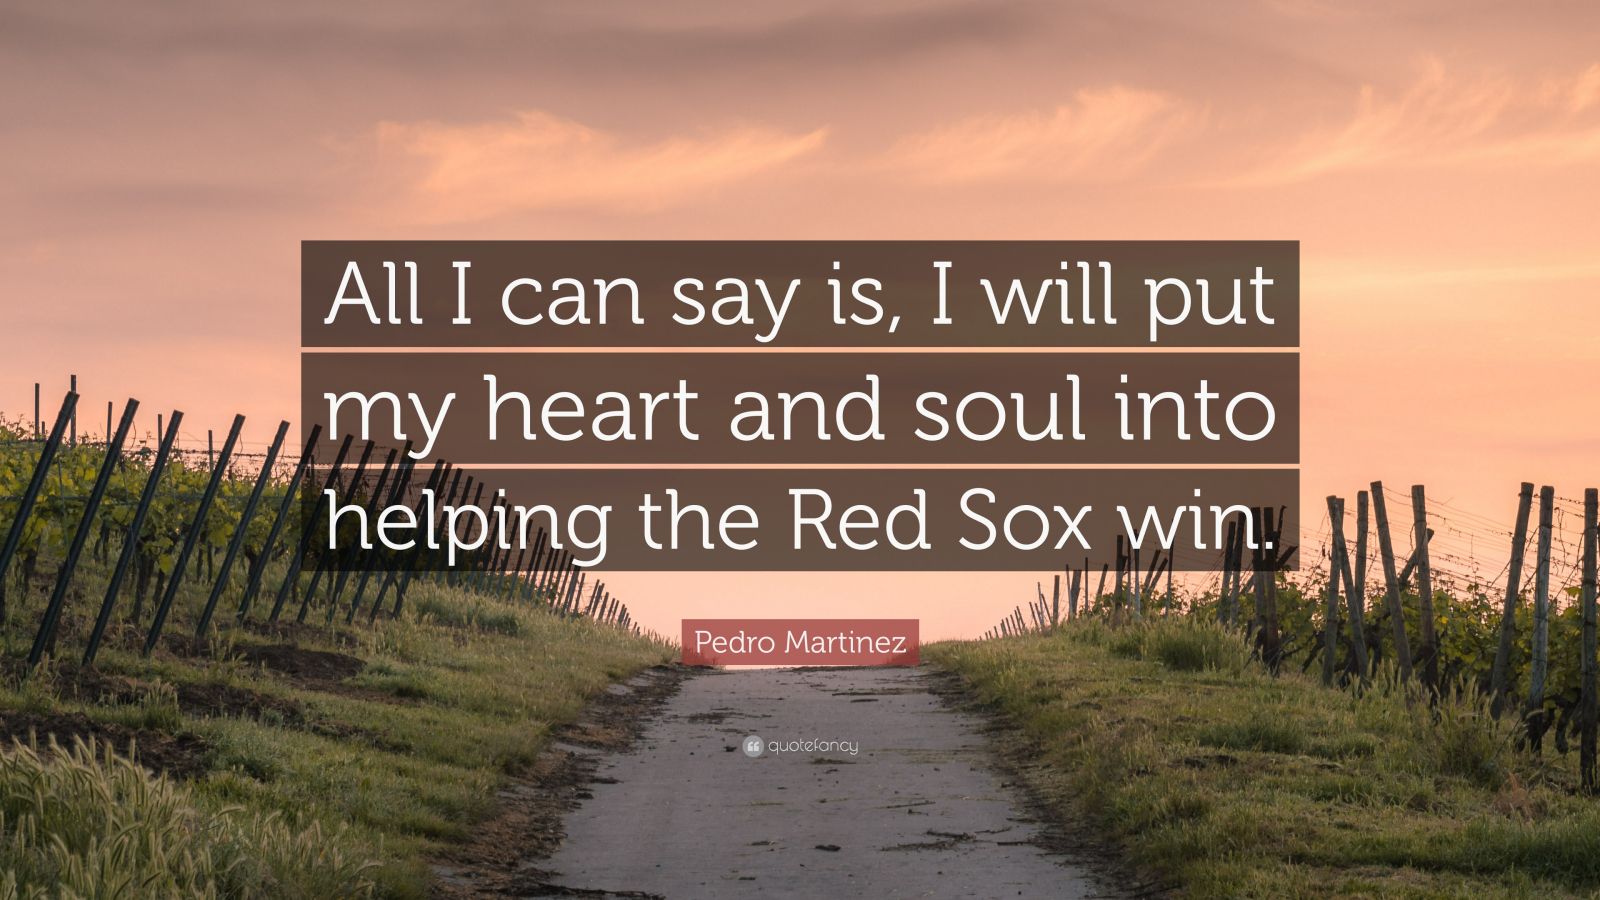 Pedro Martinez Quote: “All I can say is, I will put my heart and soul